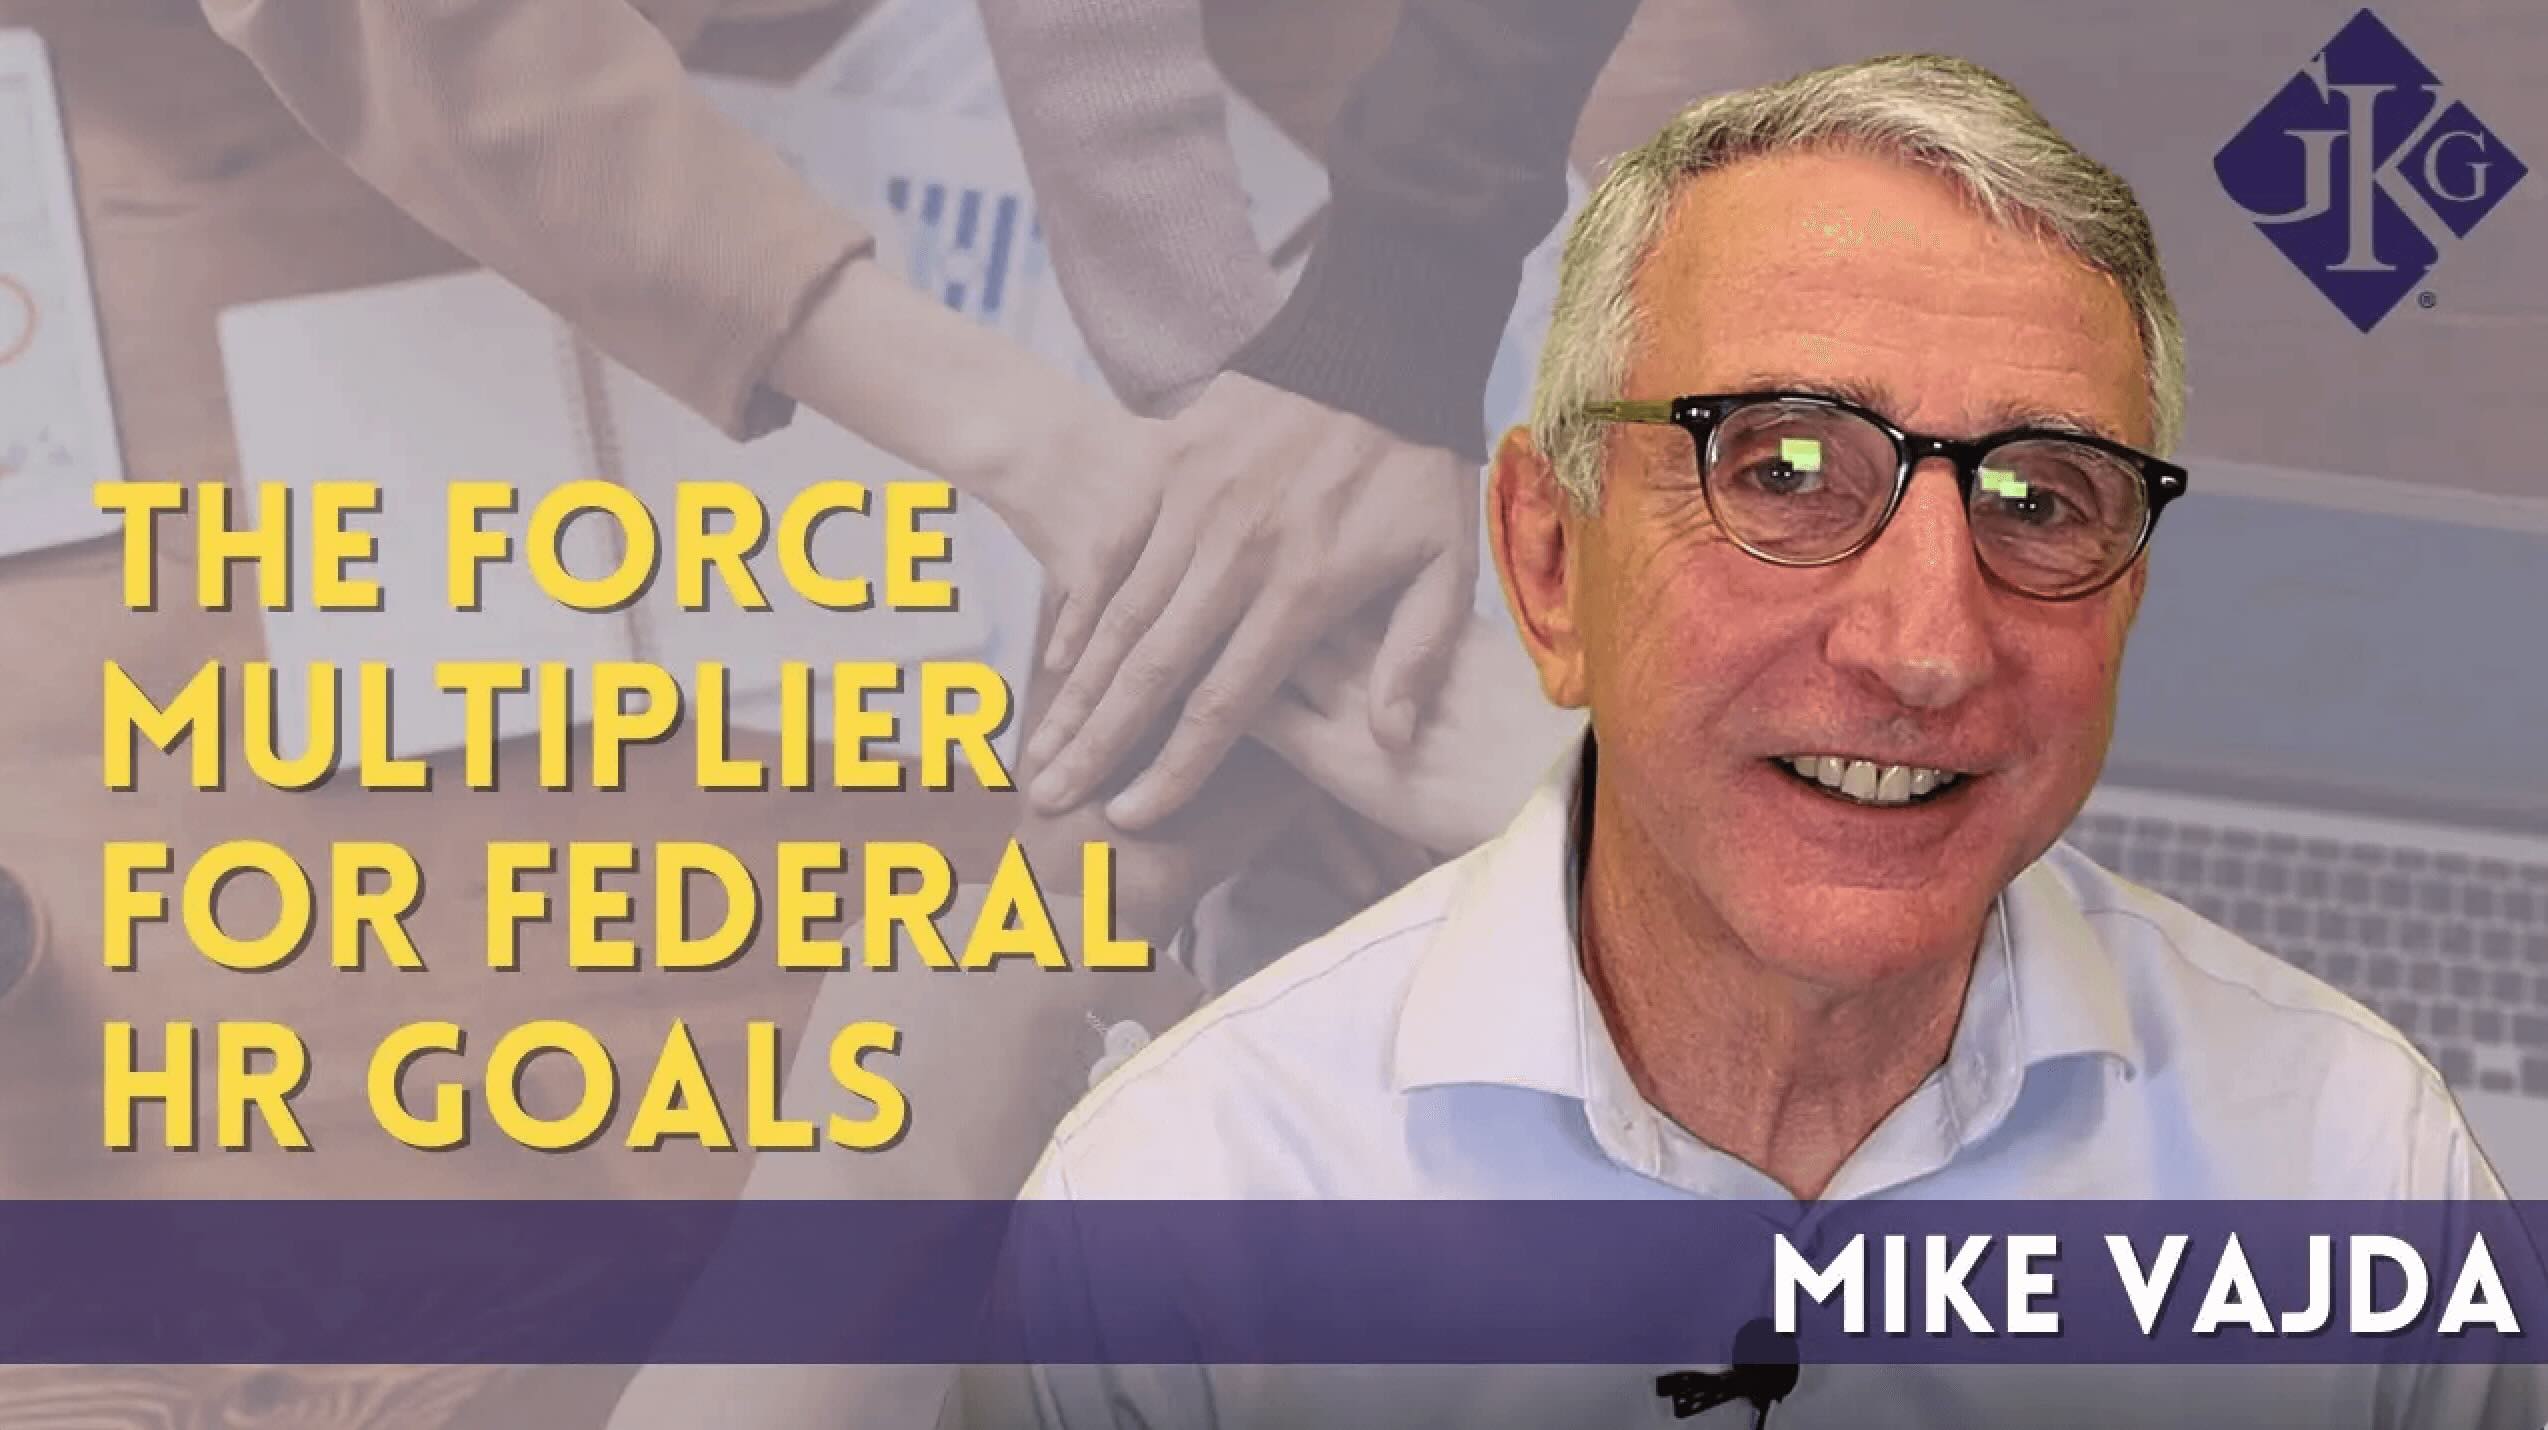 Mike Vajda smiling at the camera with a text overlay stating "The Force Multiplier for Federal HR Goals" and a GKG logo in the top right corner